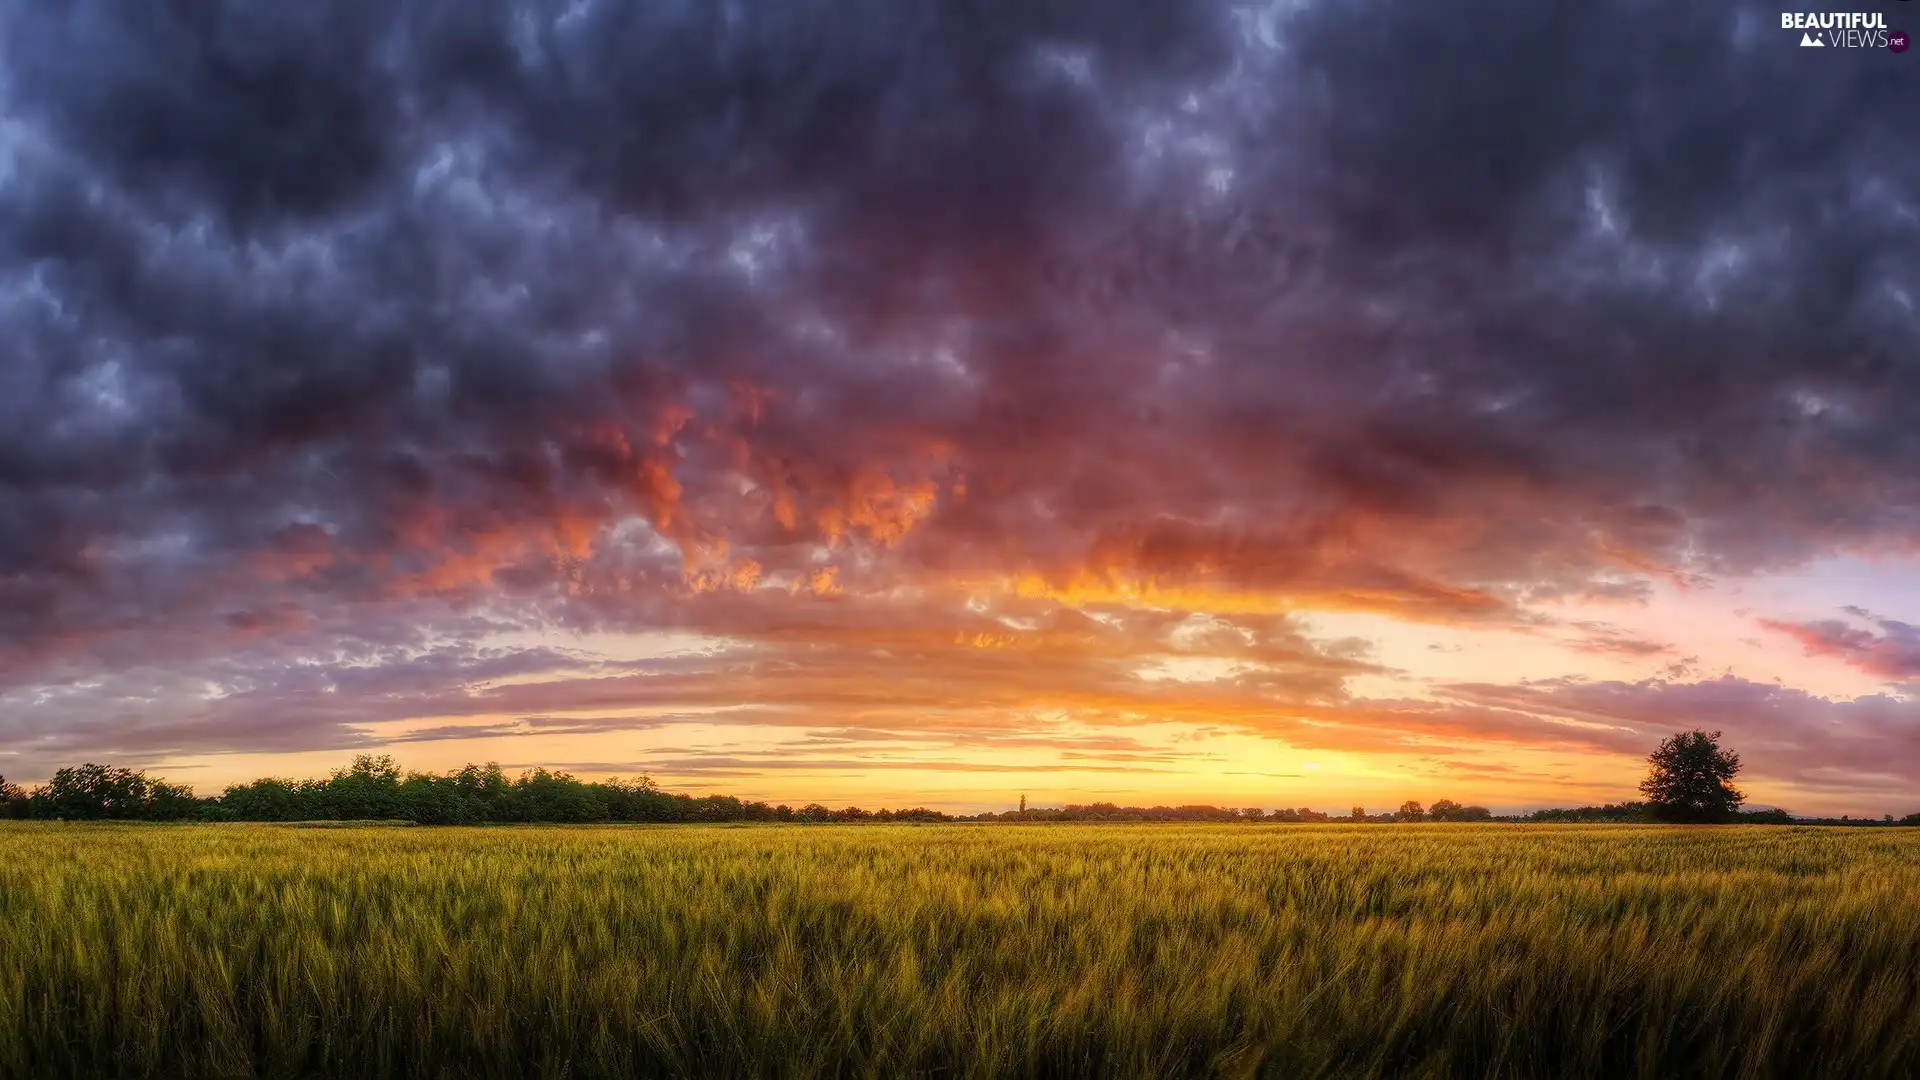 trees, viewes, clouds, Great Sunsets, Field